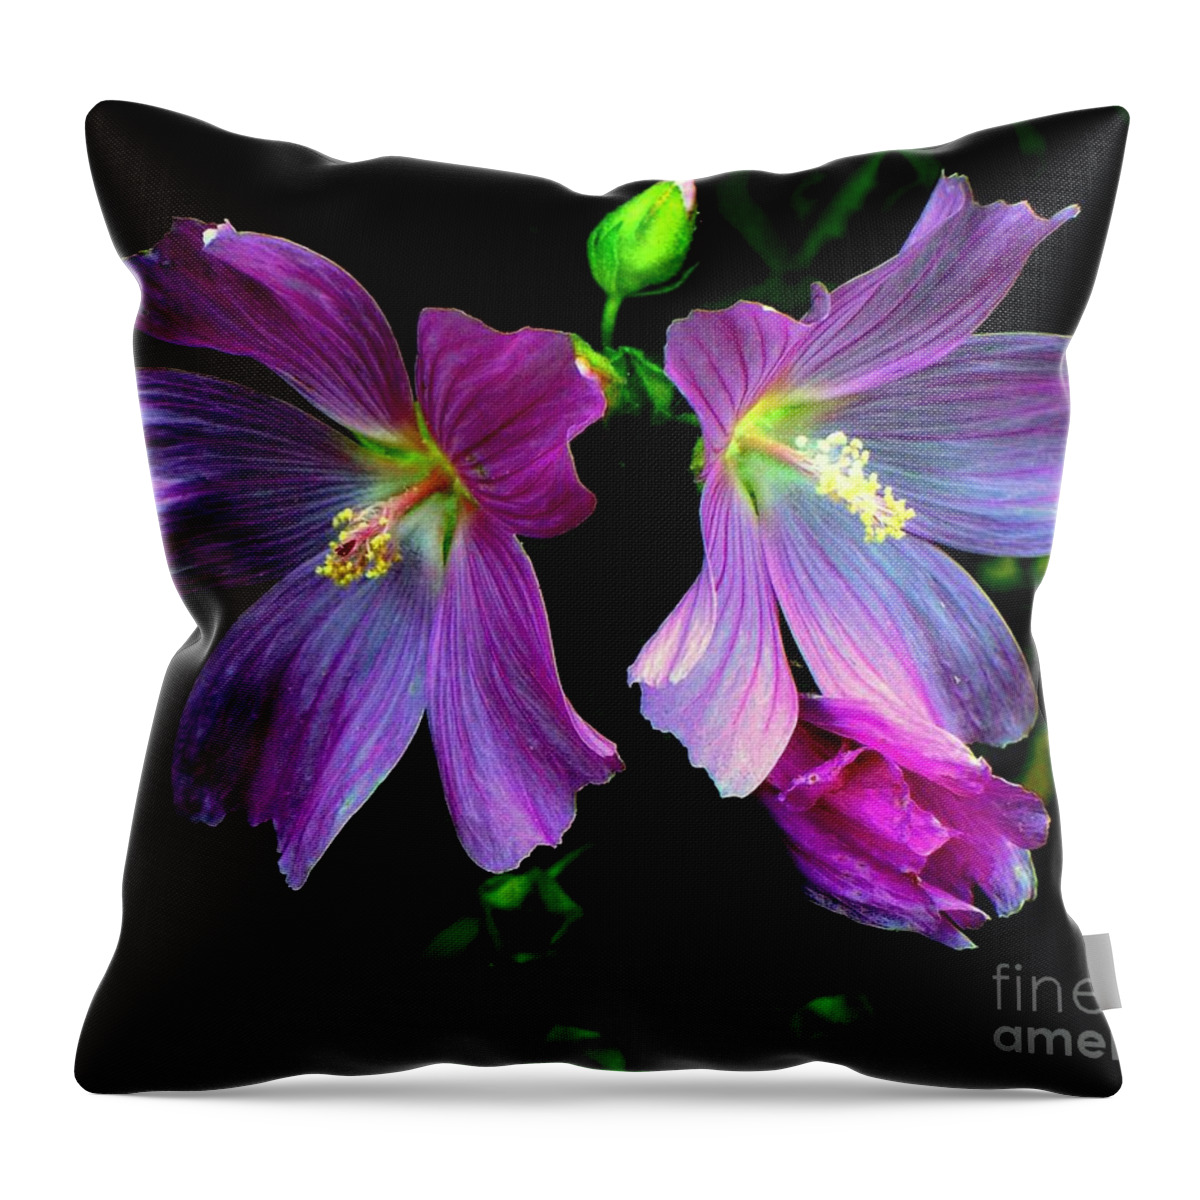 Two Flowers Throw Pillow featuring the photograph The Family by Elfriede Fulda